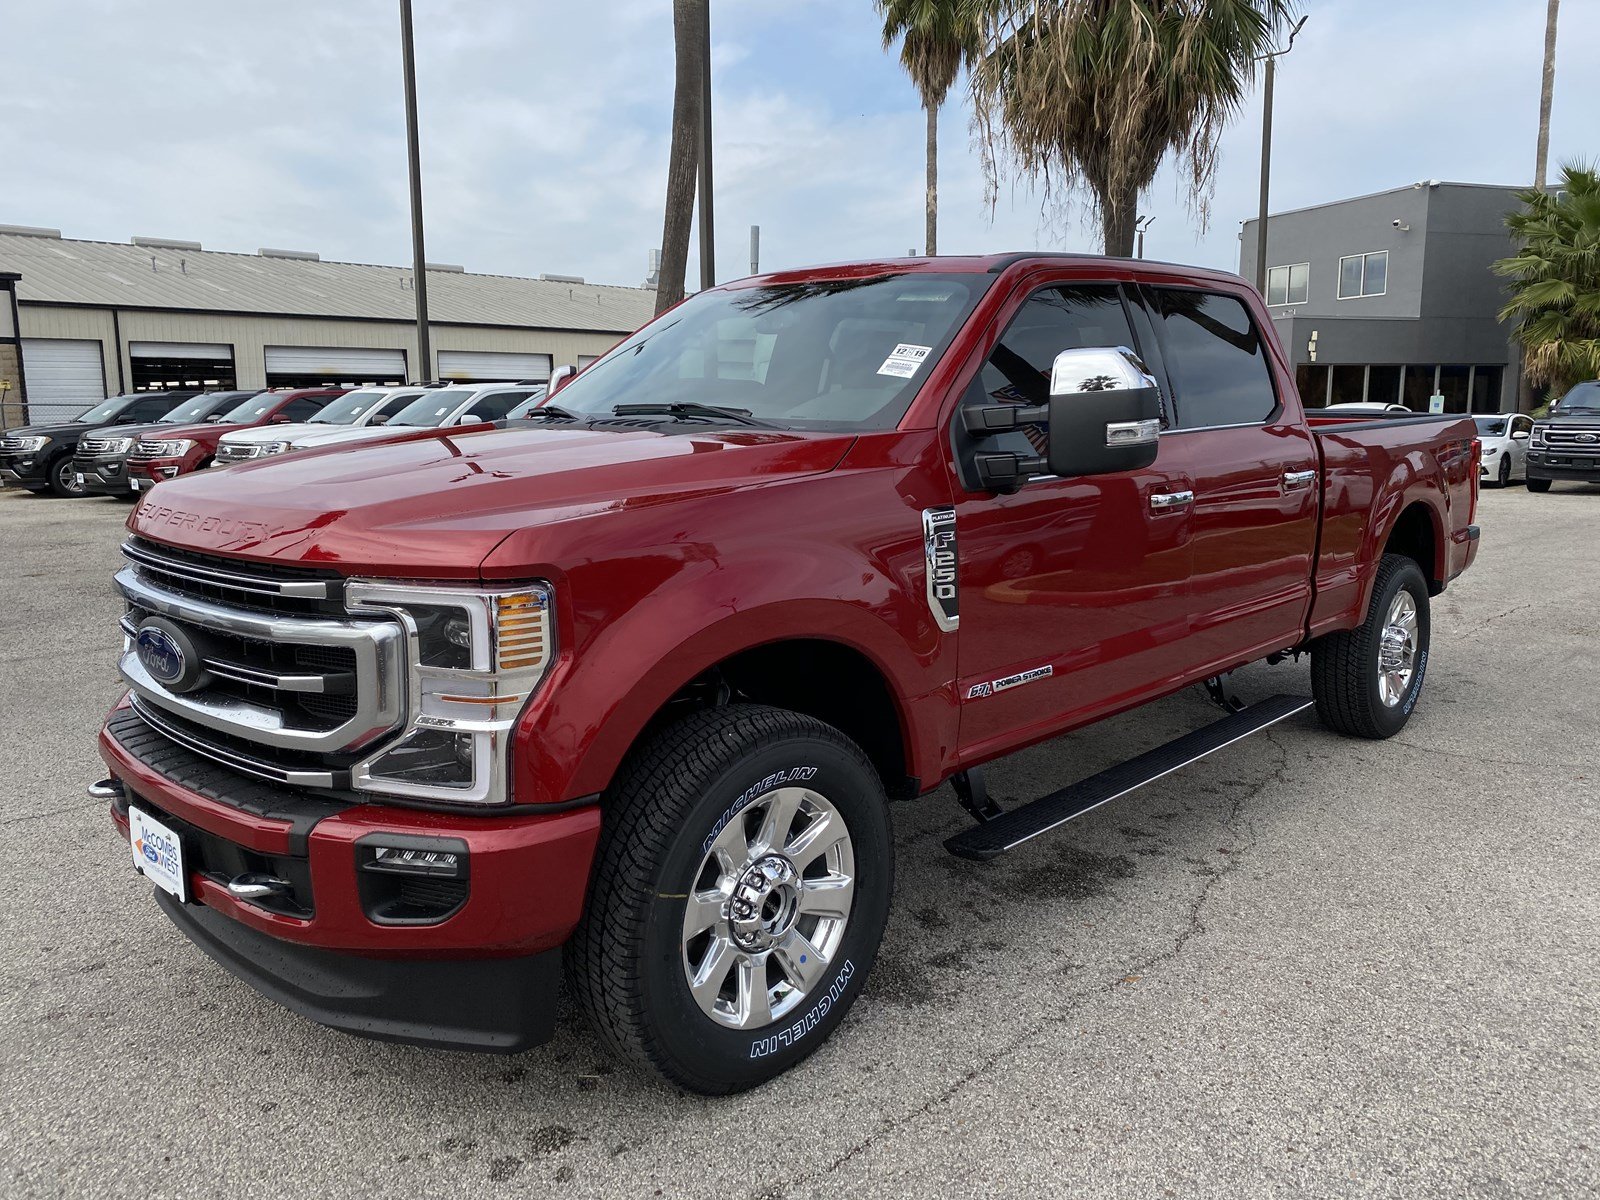 New 2020 Ford Super Duty F 250 Srw Platinum With Navigation 4wd